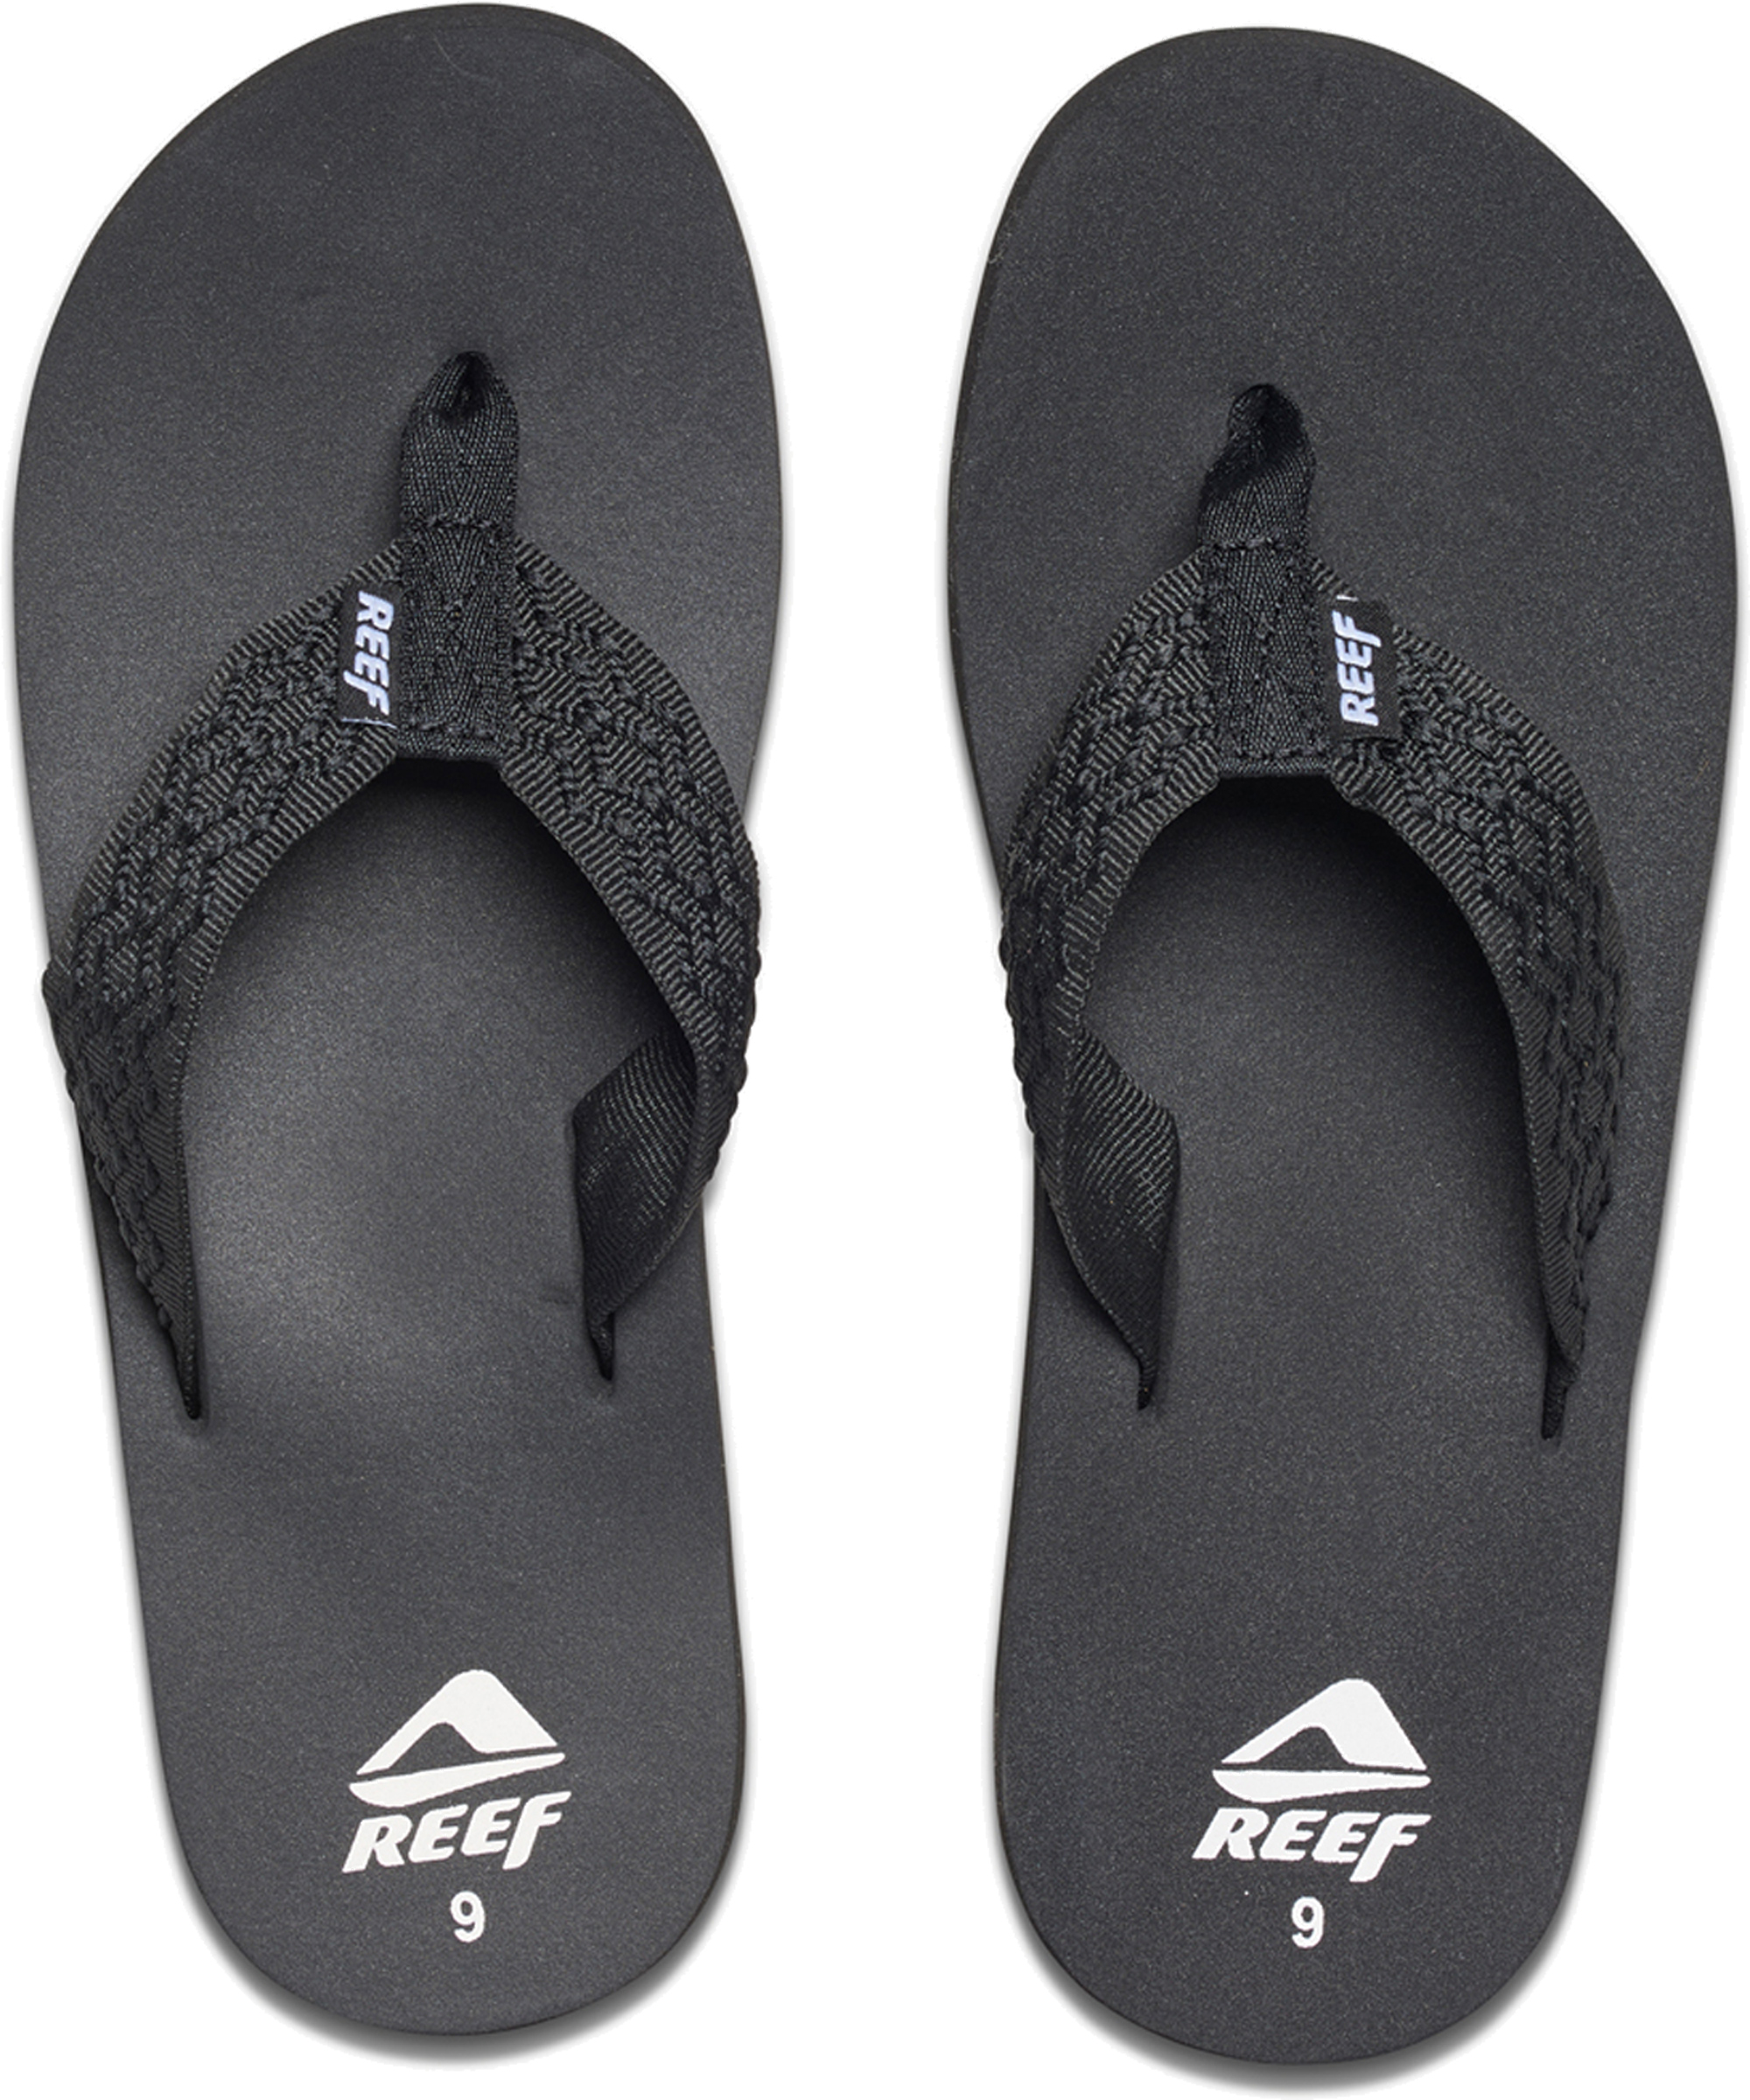 Reef Black Smoothy size 5